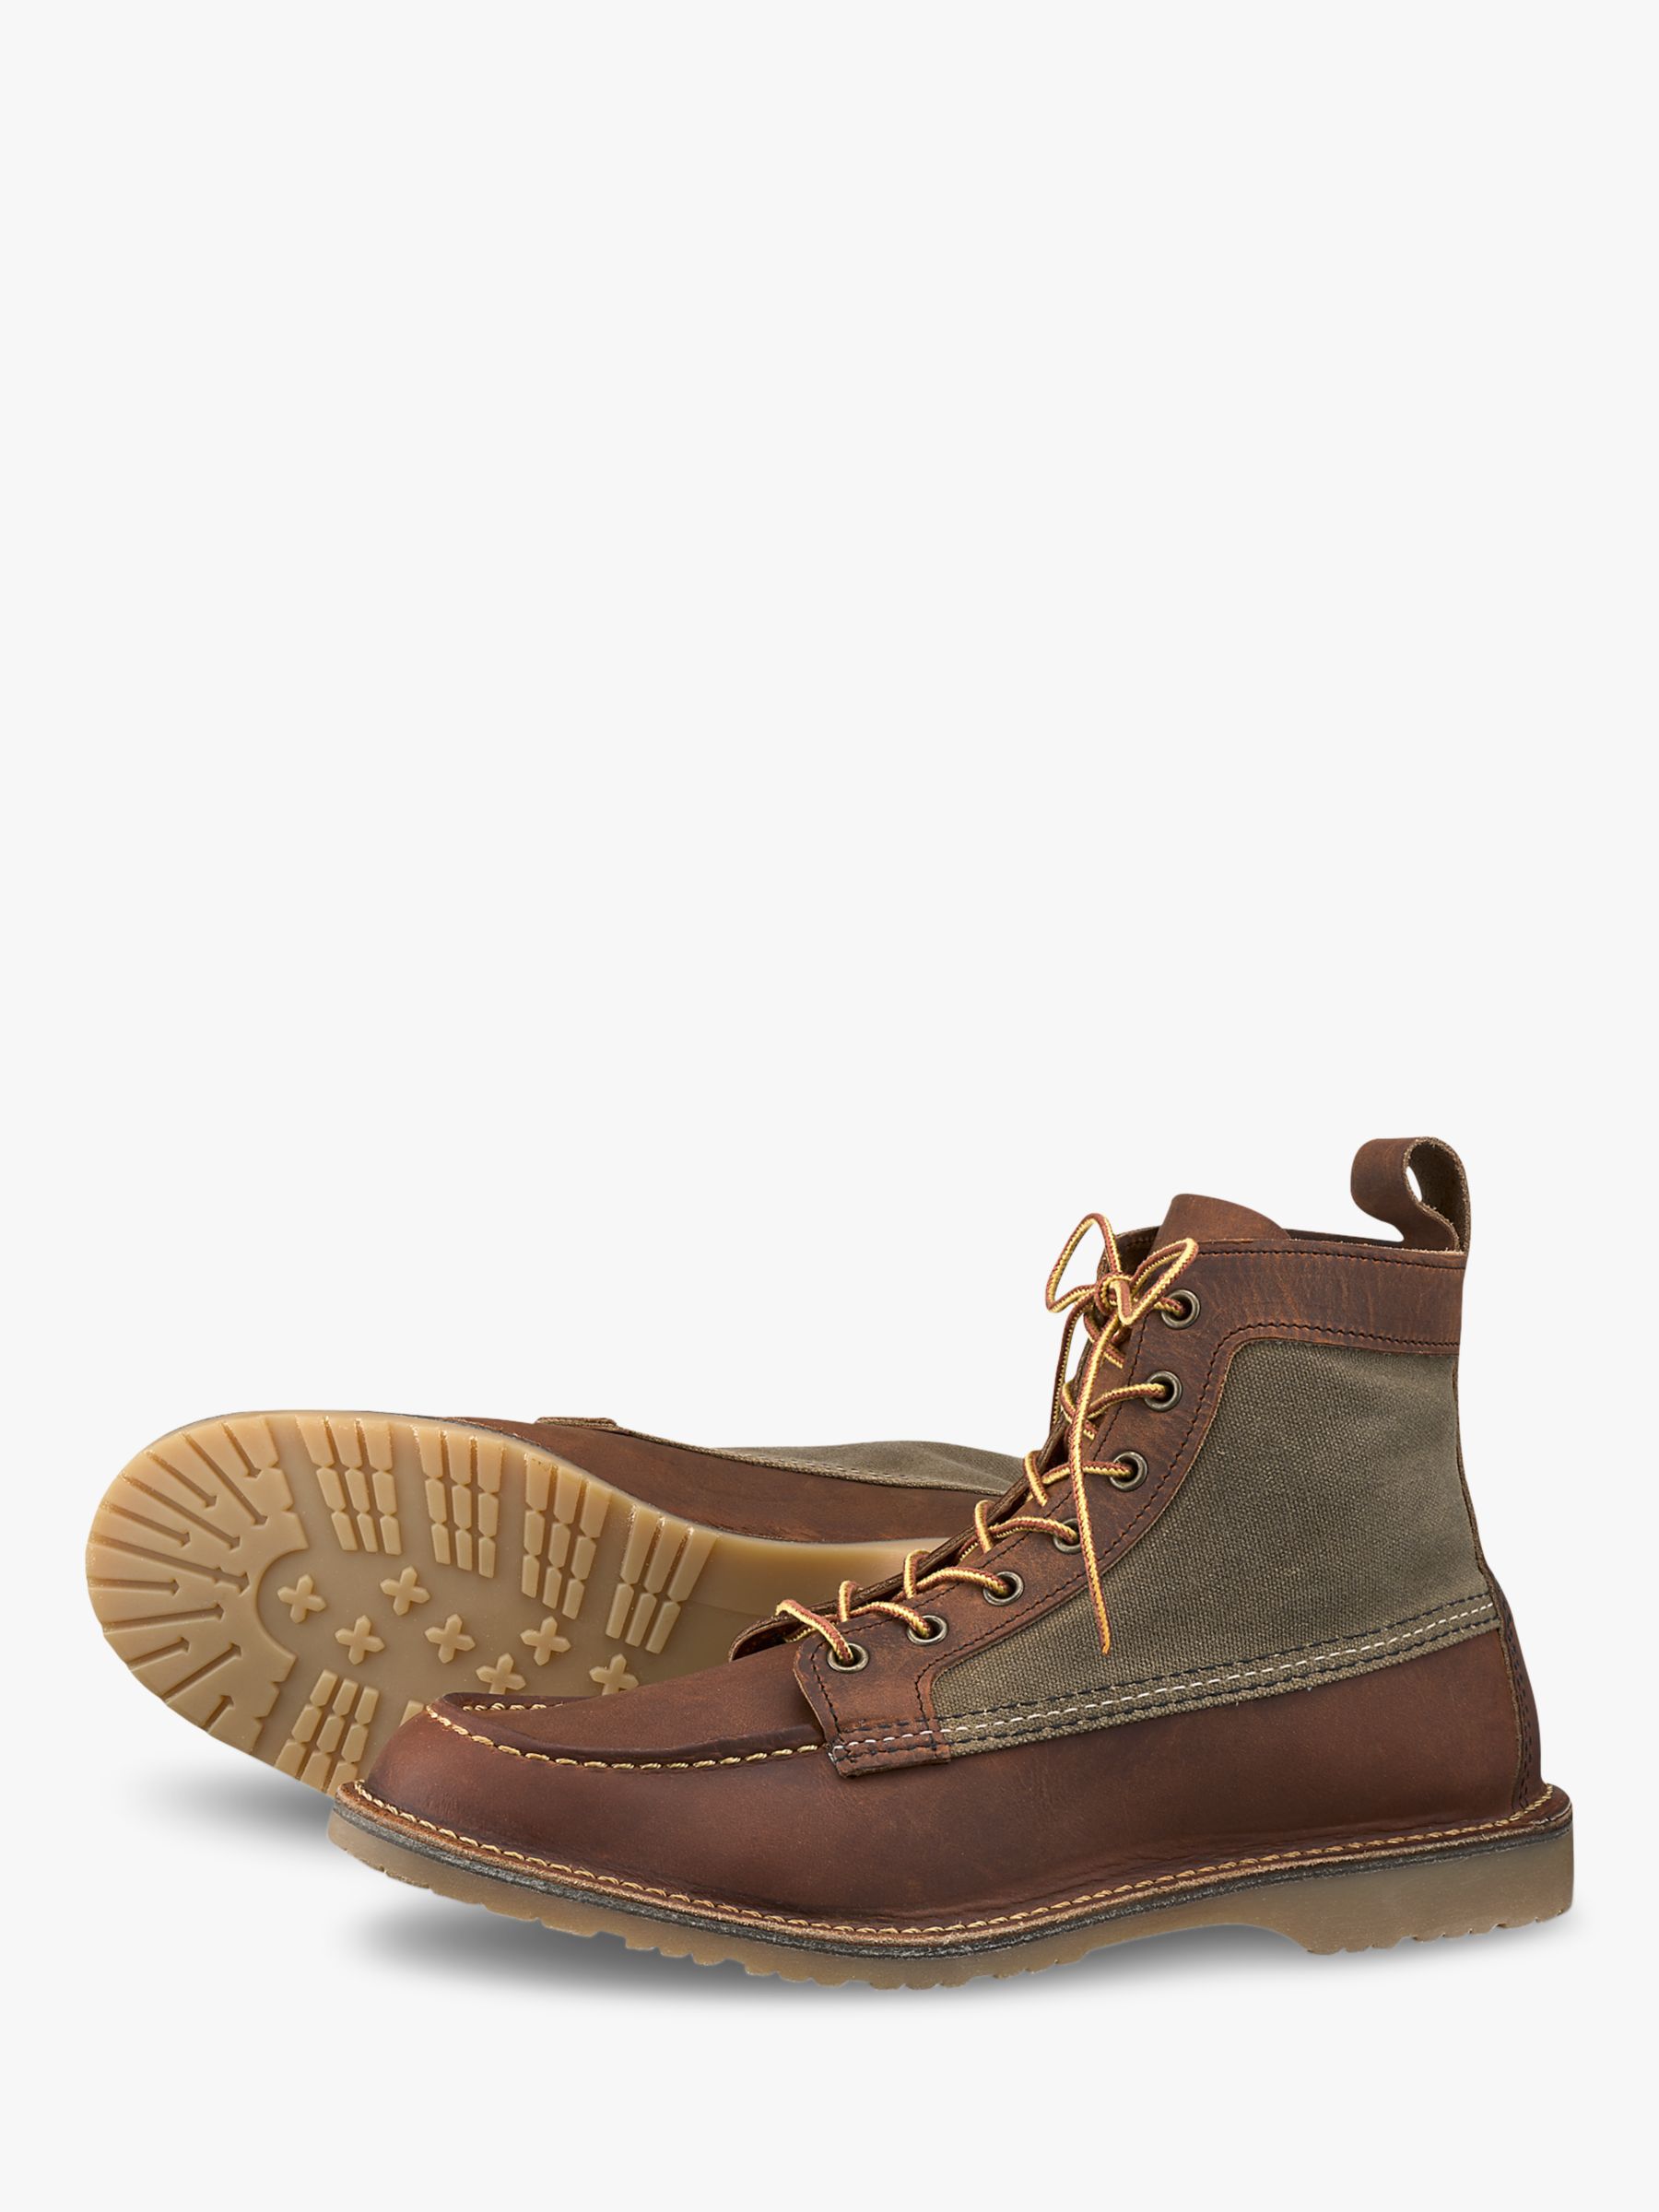 john lewis red wing boots